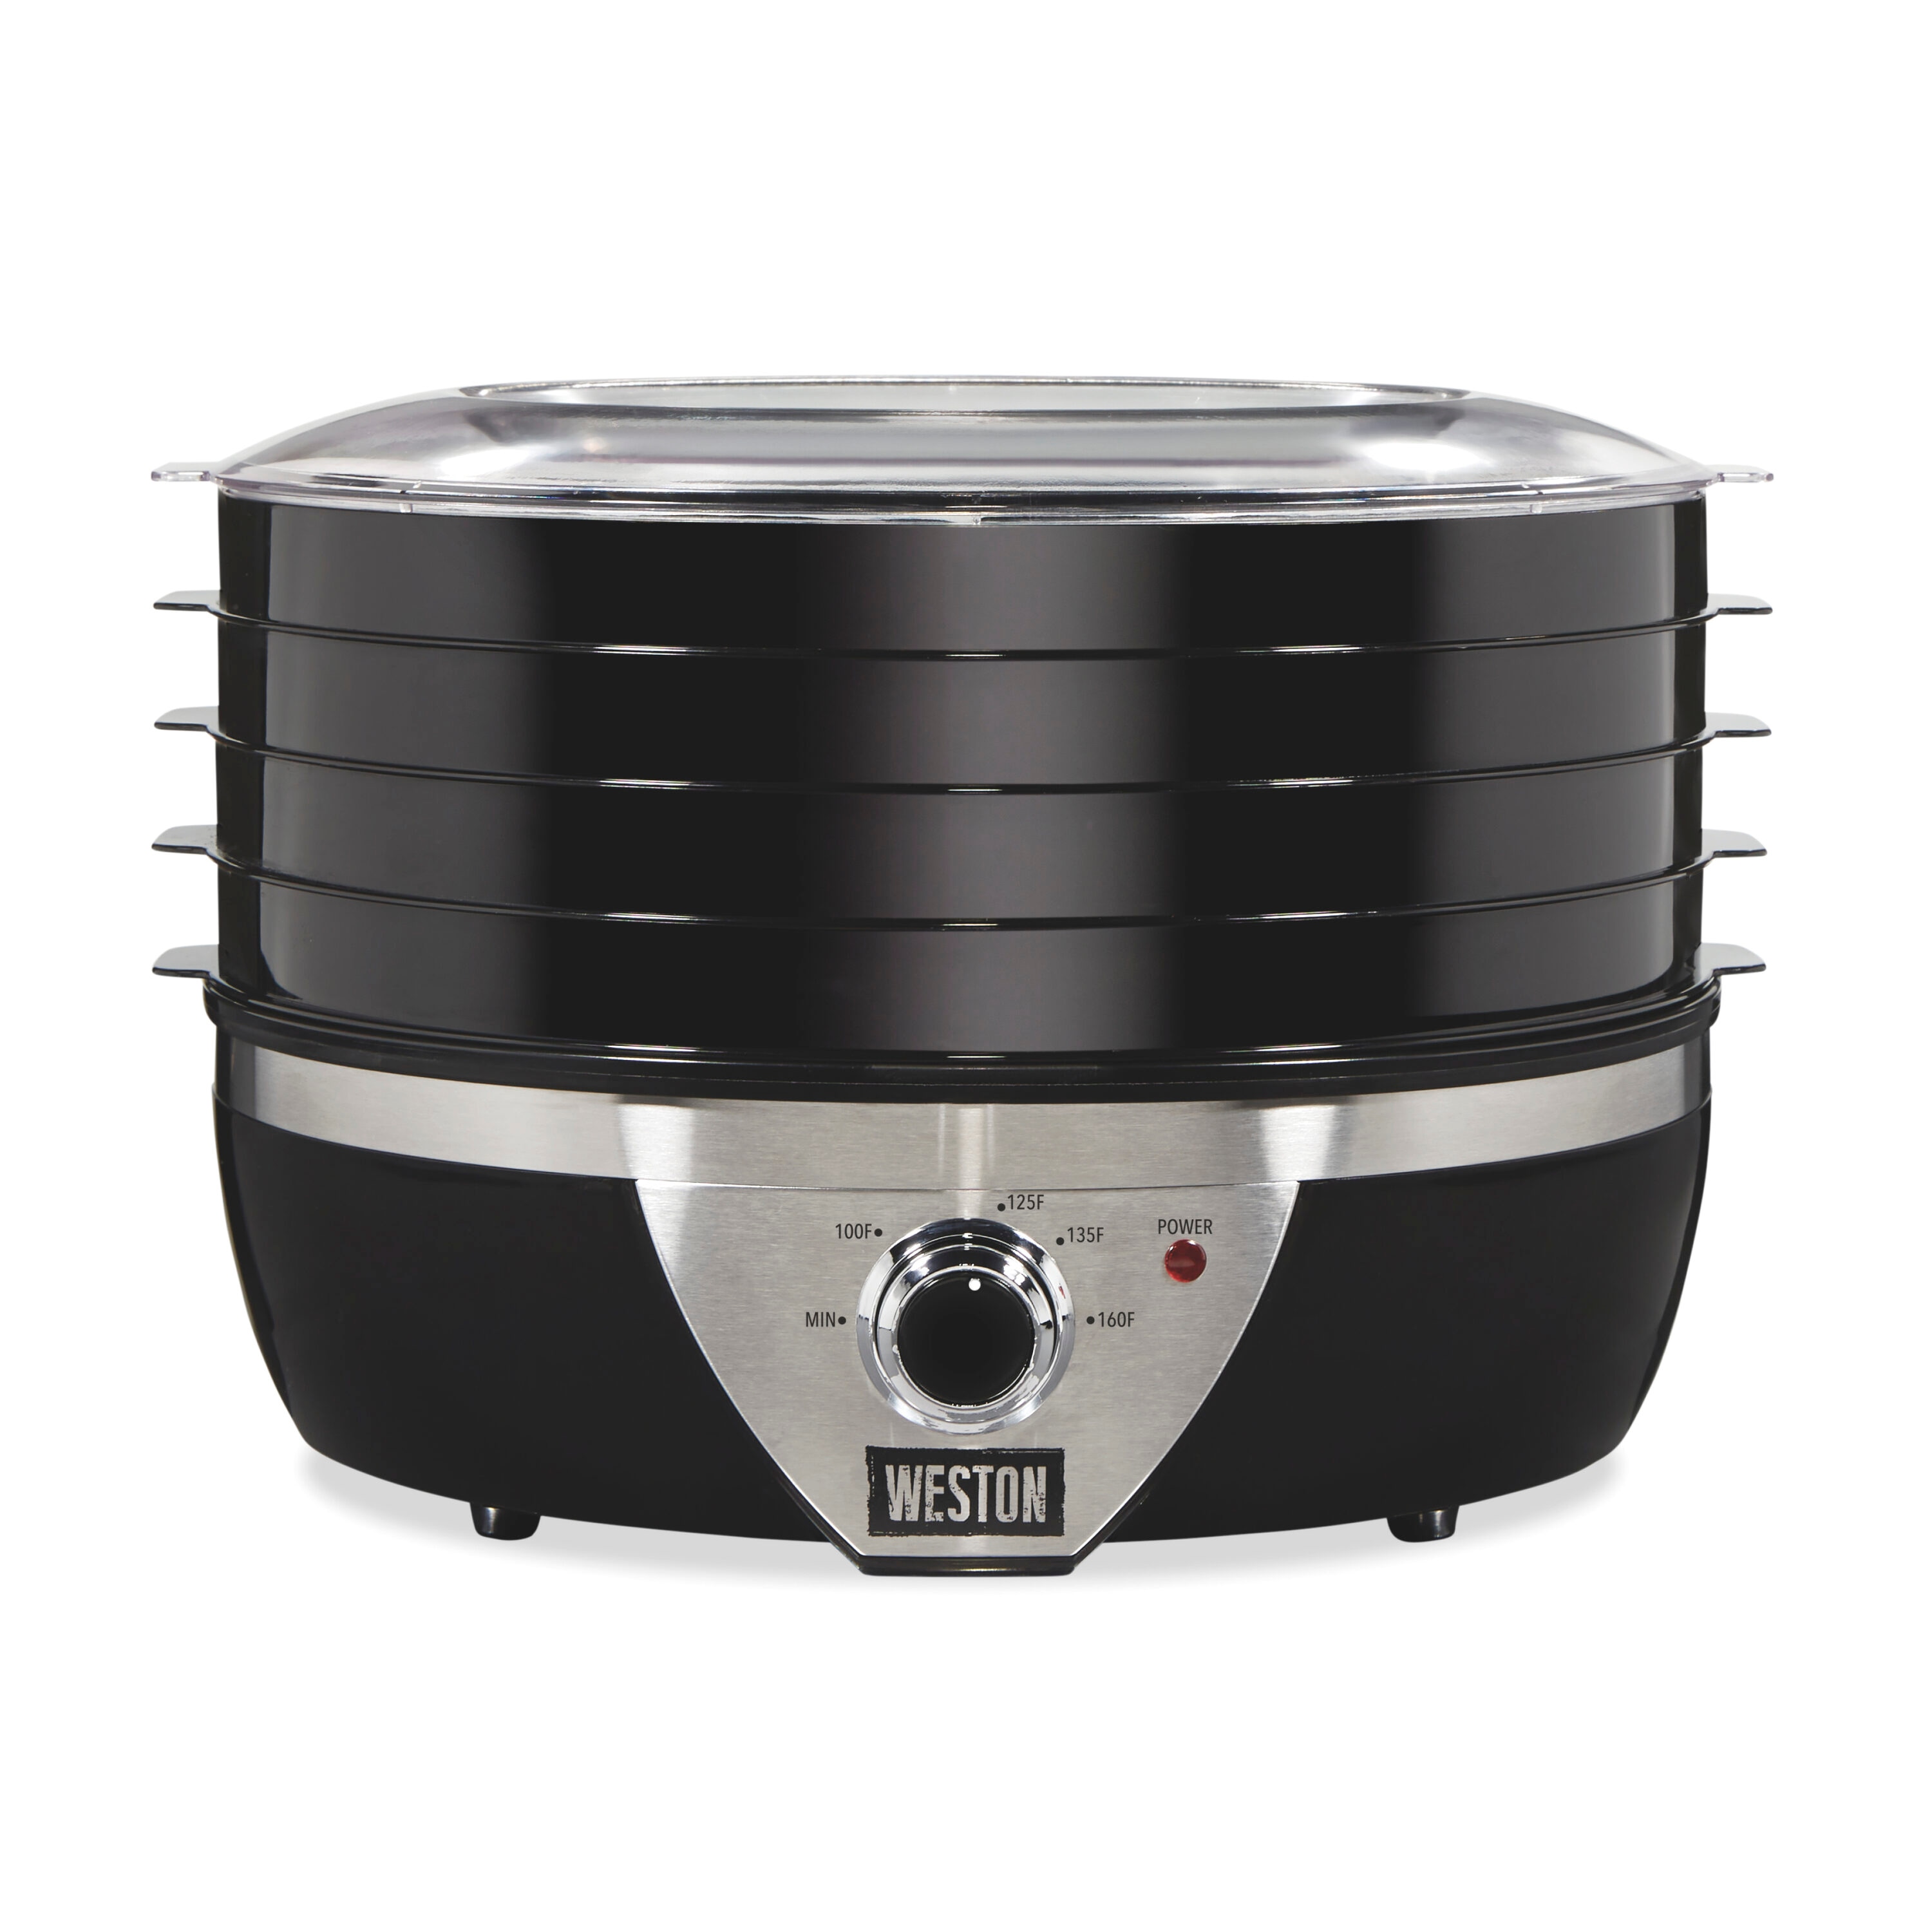 Continental Electric Pro 4-6 Quart Digital Slow Cooker Stainless